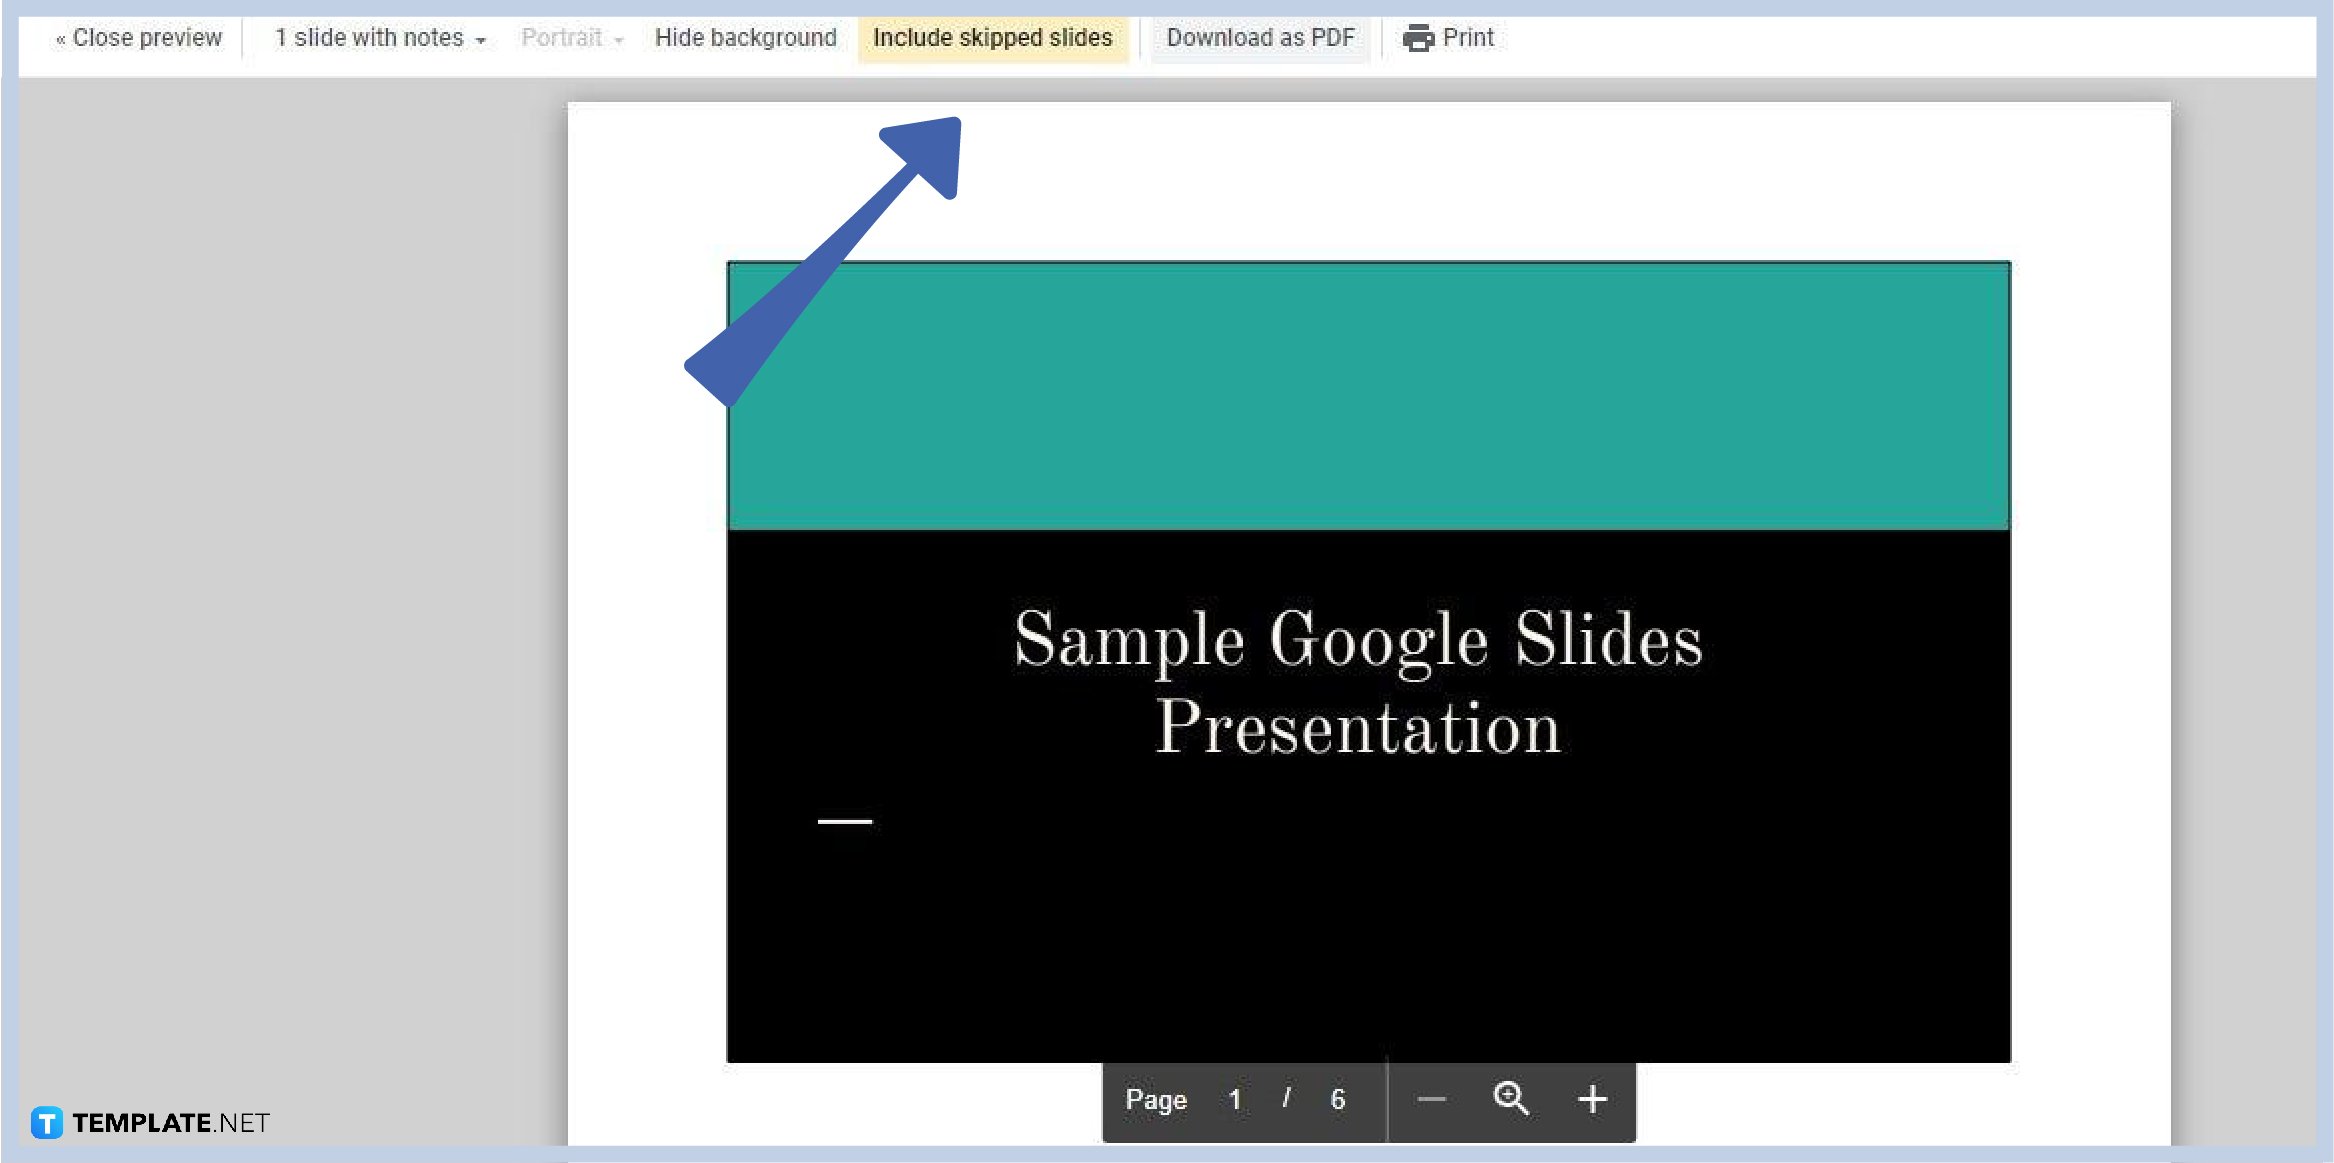 how-to-export-convert-download-google-slides-as-pdf-step-4